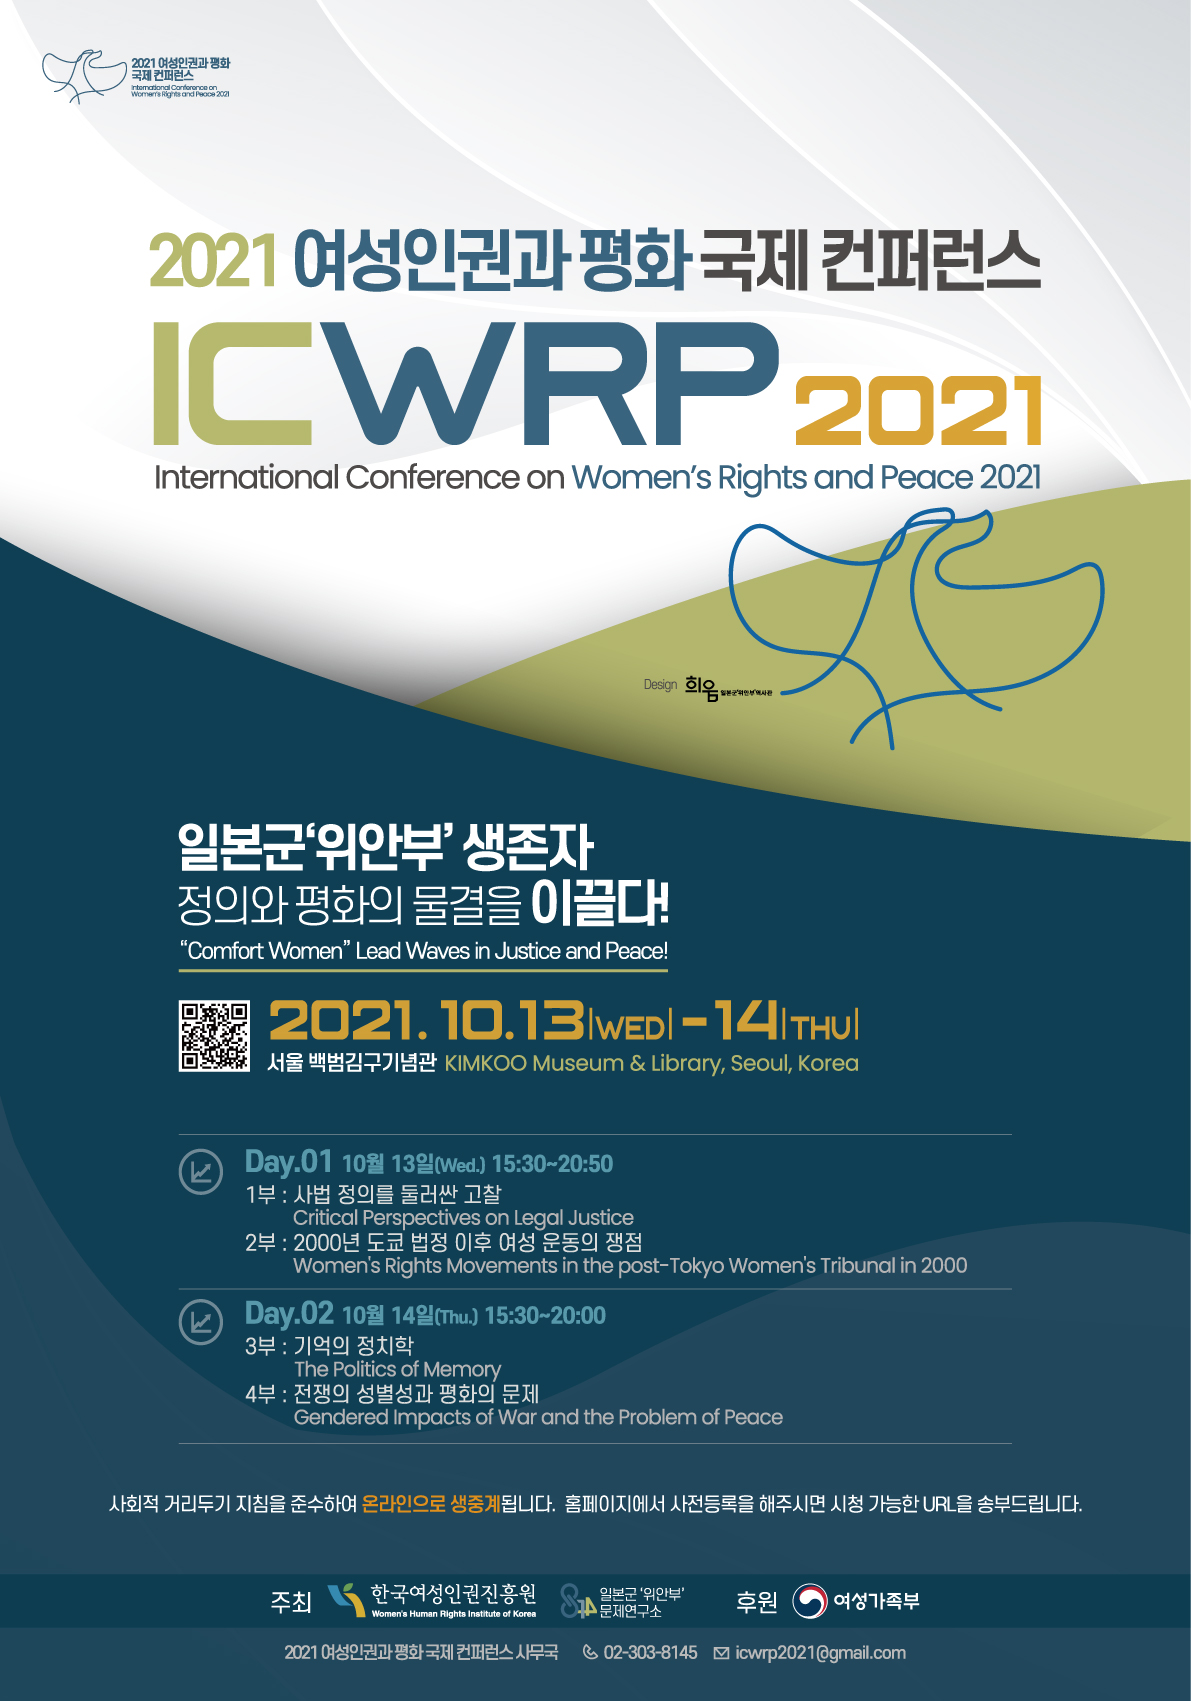 The poster of the International Conference On Women’s Rights And Peace 2021